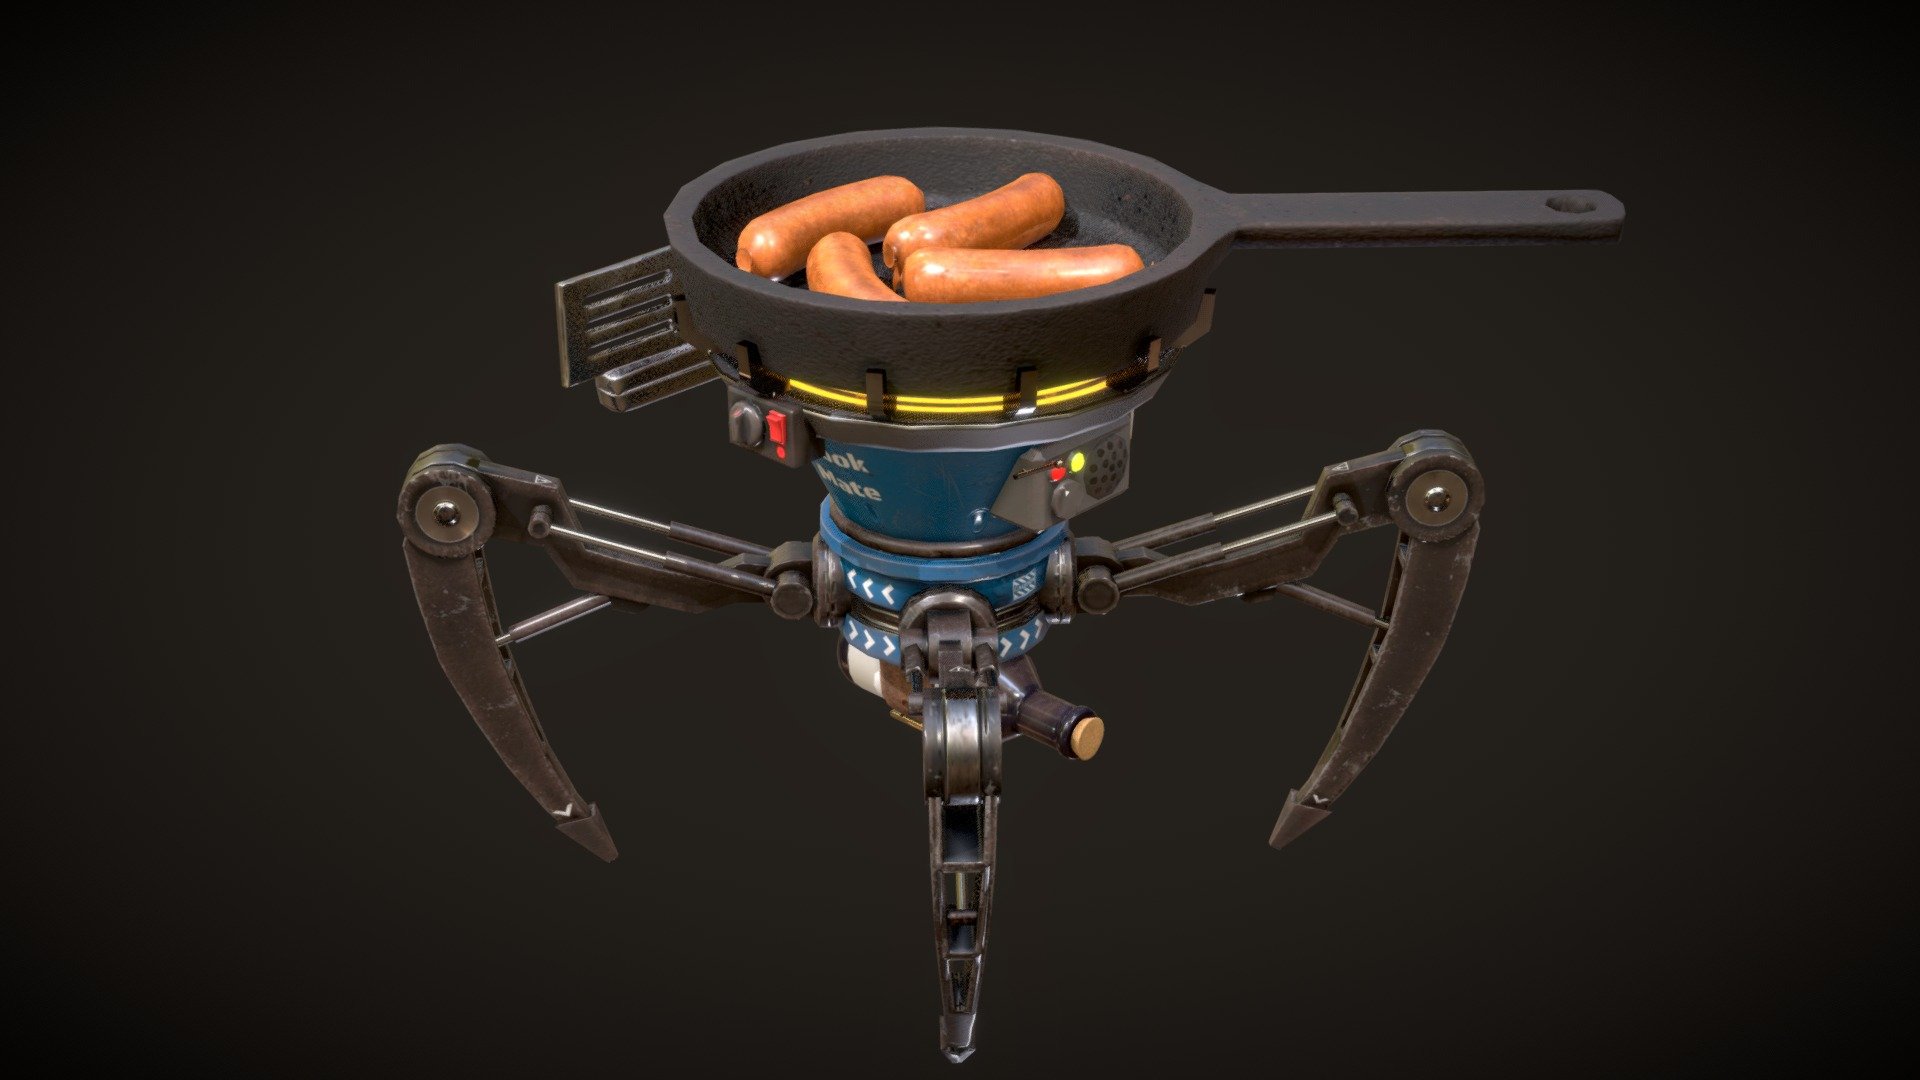 Who doesnt love a good bbq while camping? However hiking to a remote location can make it hard to carry your stove and fridge. Well dont worry, Cook Mate is here to help you enjoy a tasty meal after a long day of treking through the wilderness. 
This was created for the SketchFab Low Poly Challenge: Adventure Props. Created in Maya and Textured with Substance Painter 3d model